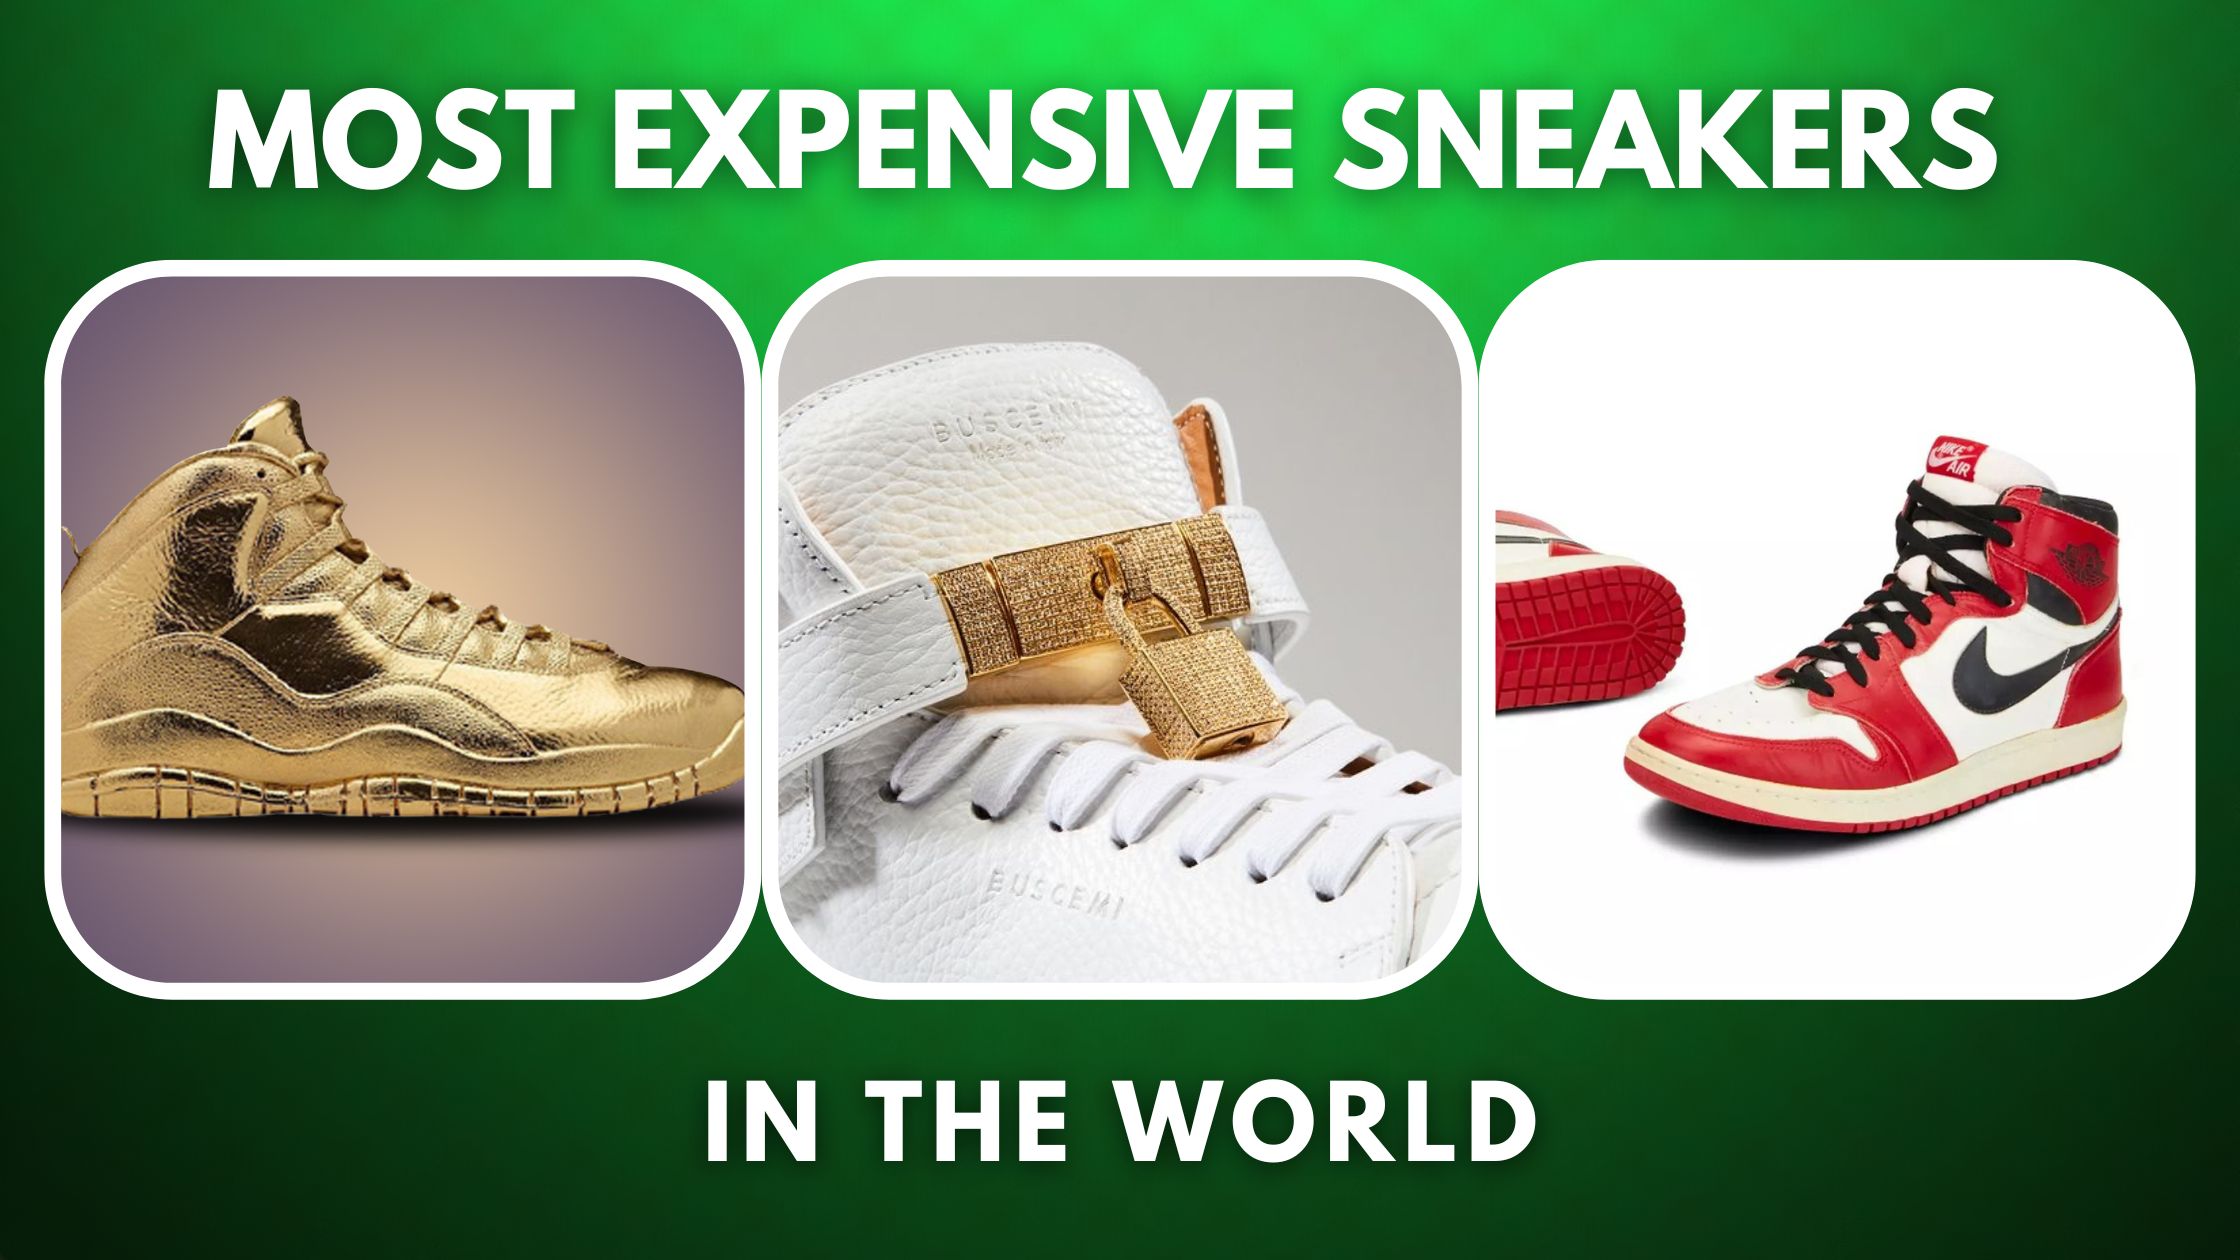 Top 10 Most Expensive Sneakers in the World